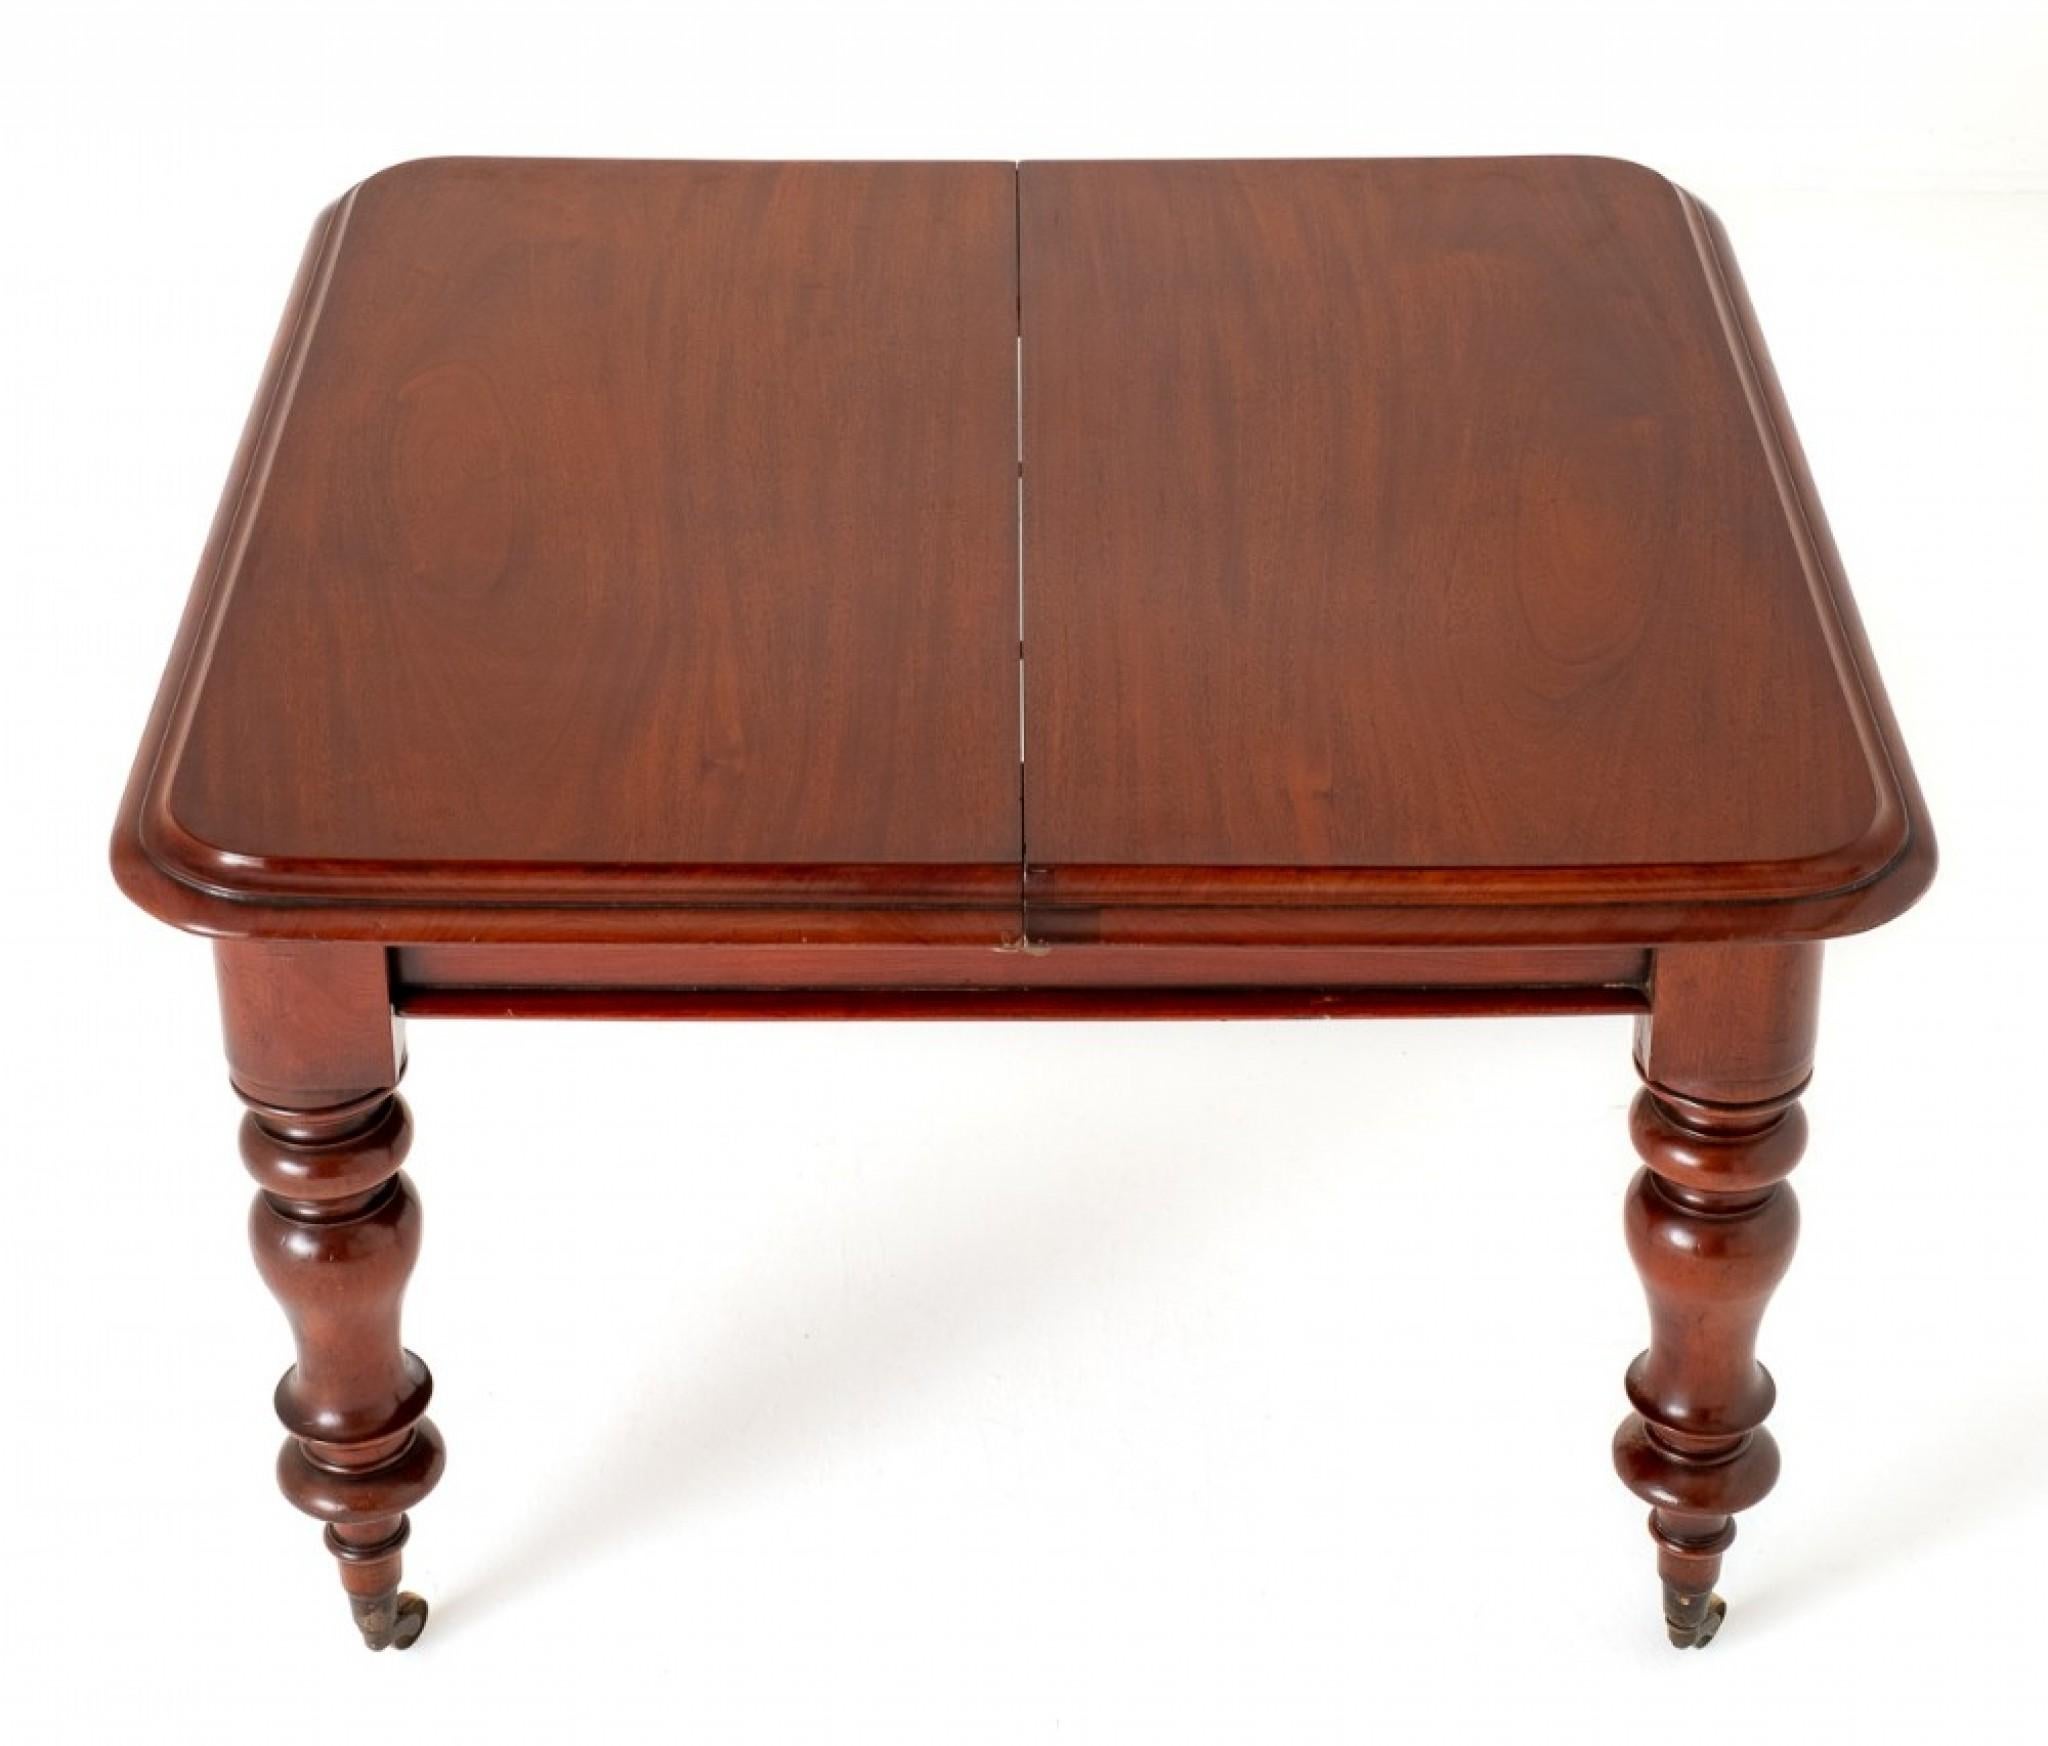 Victorian Dining Table Mahogany 2 Leaf Extending 1860 For Sale 1